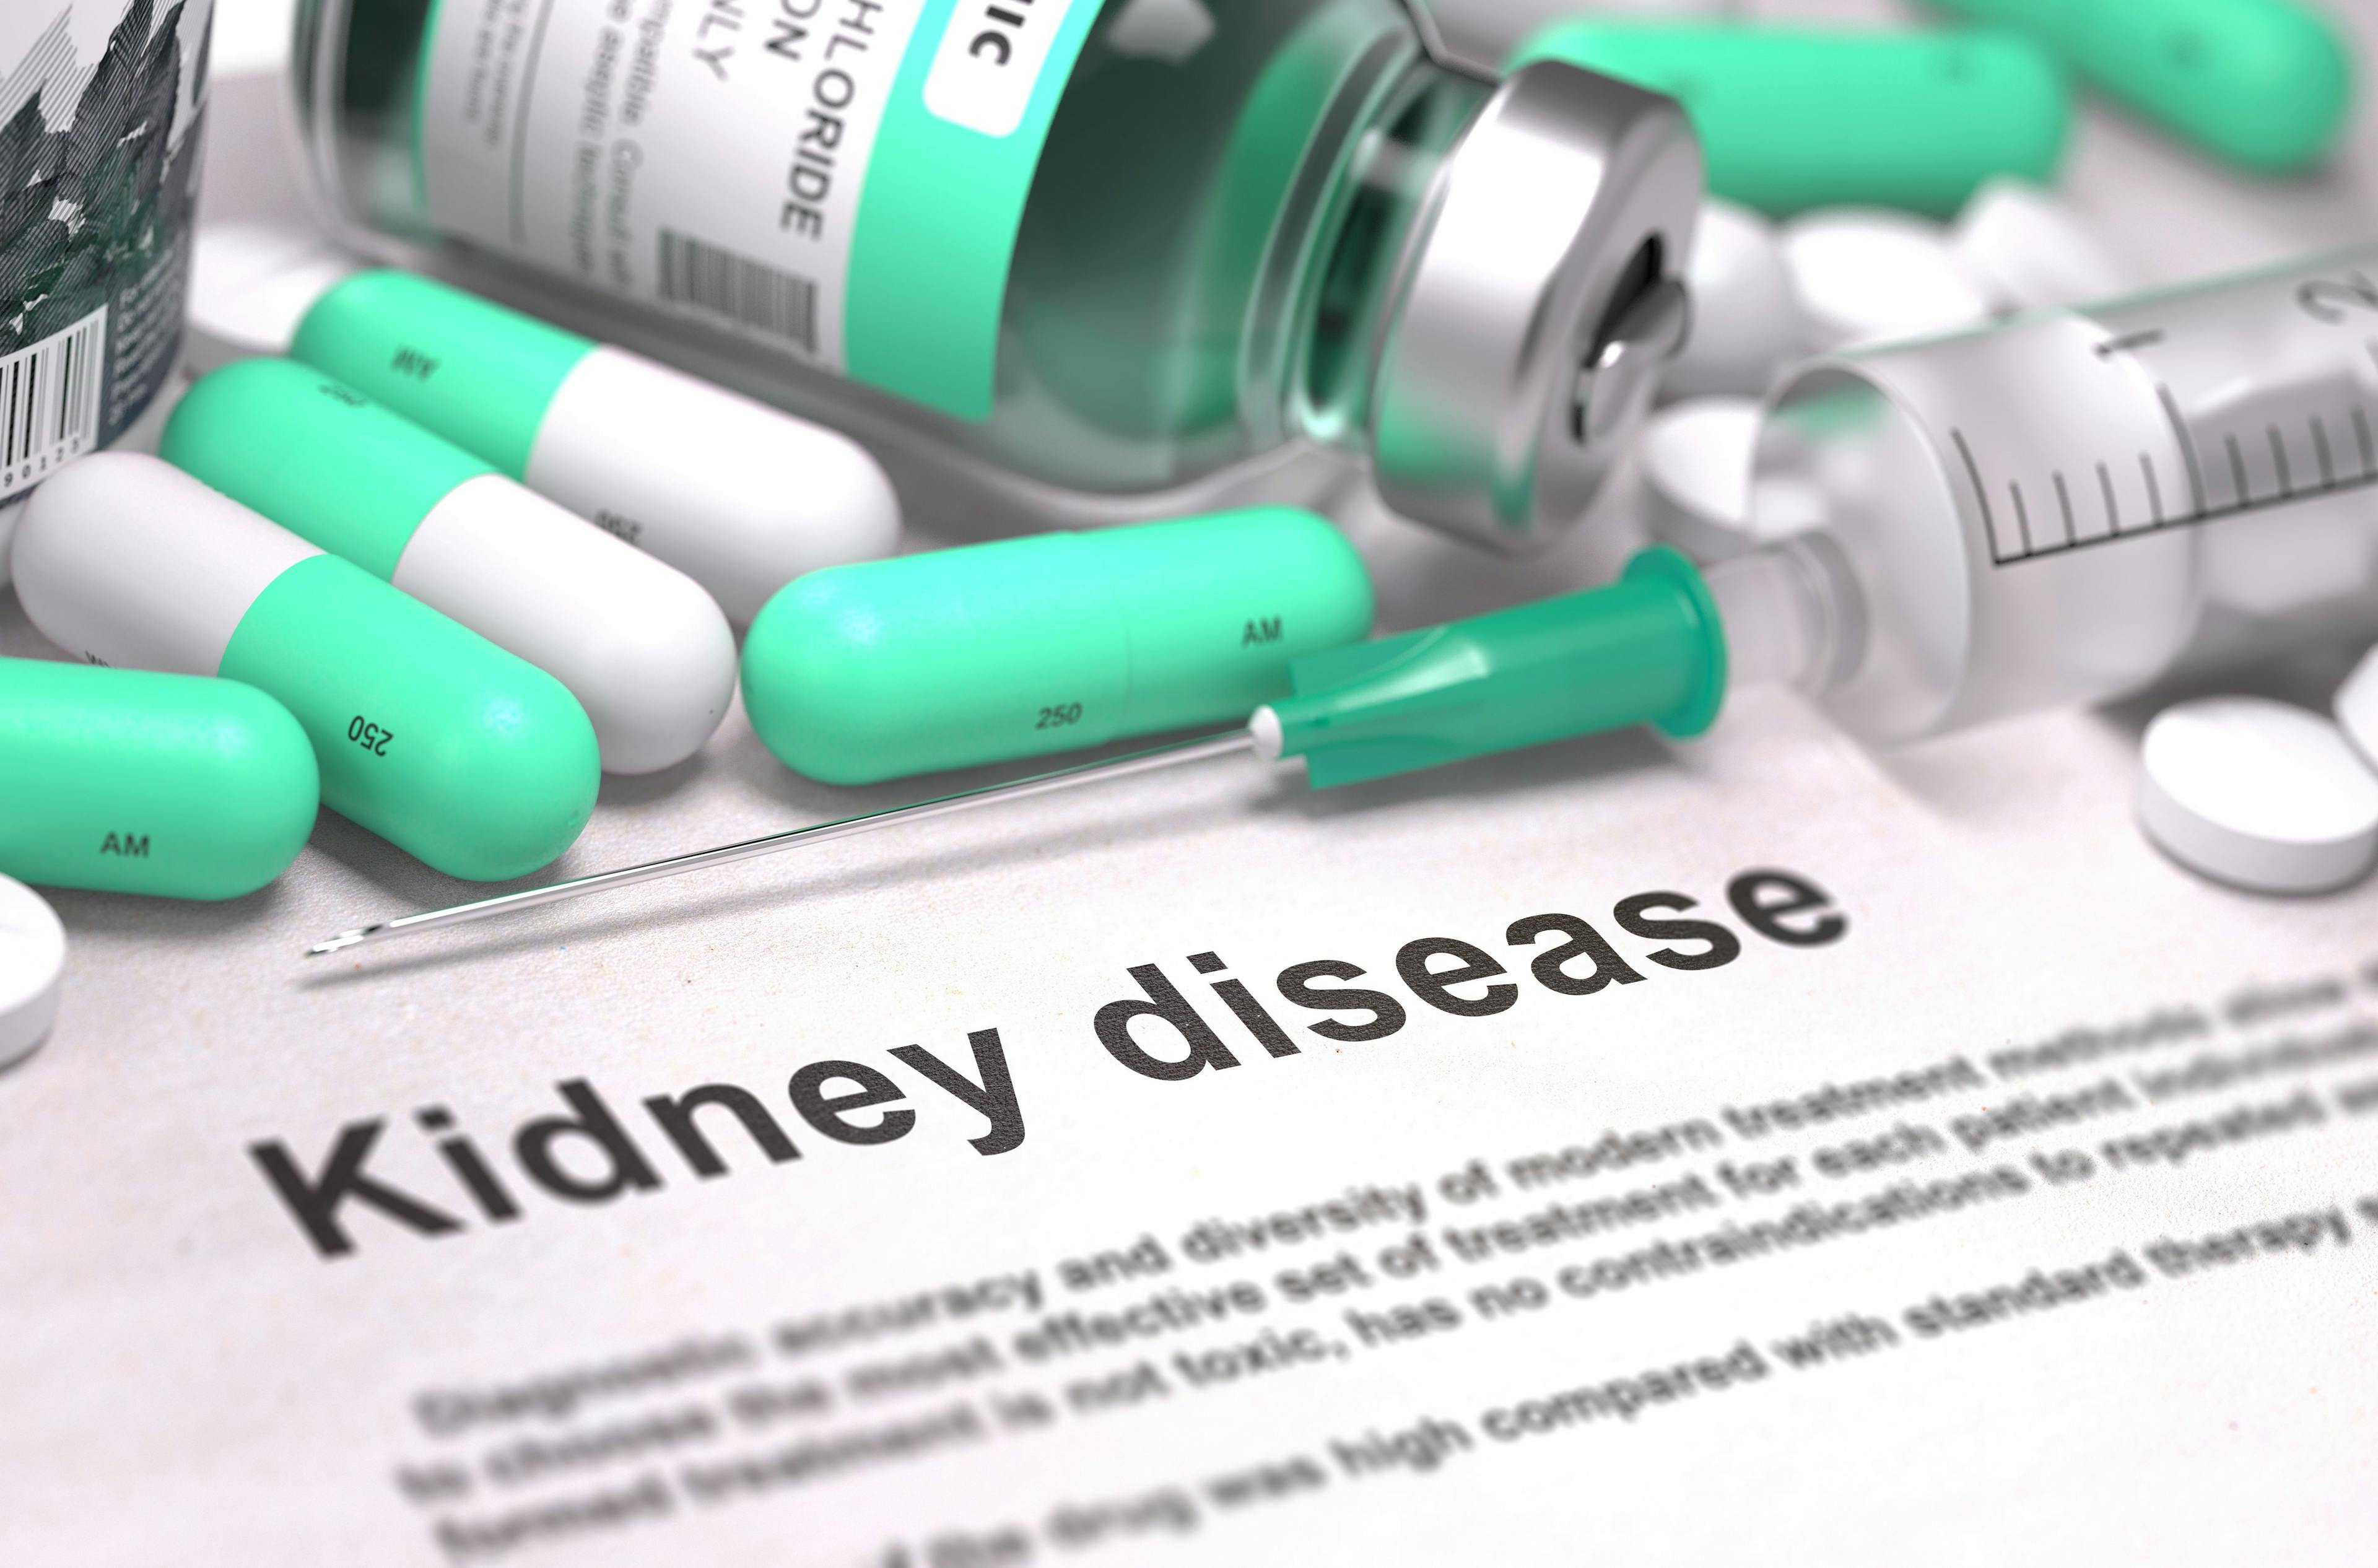 Medication and needle on paper with kidney disease written on it | Credit: Fotolia